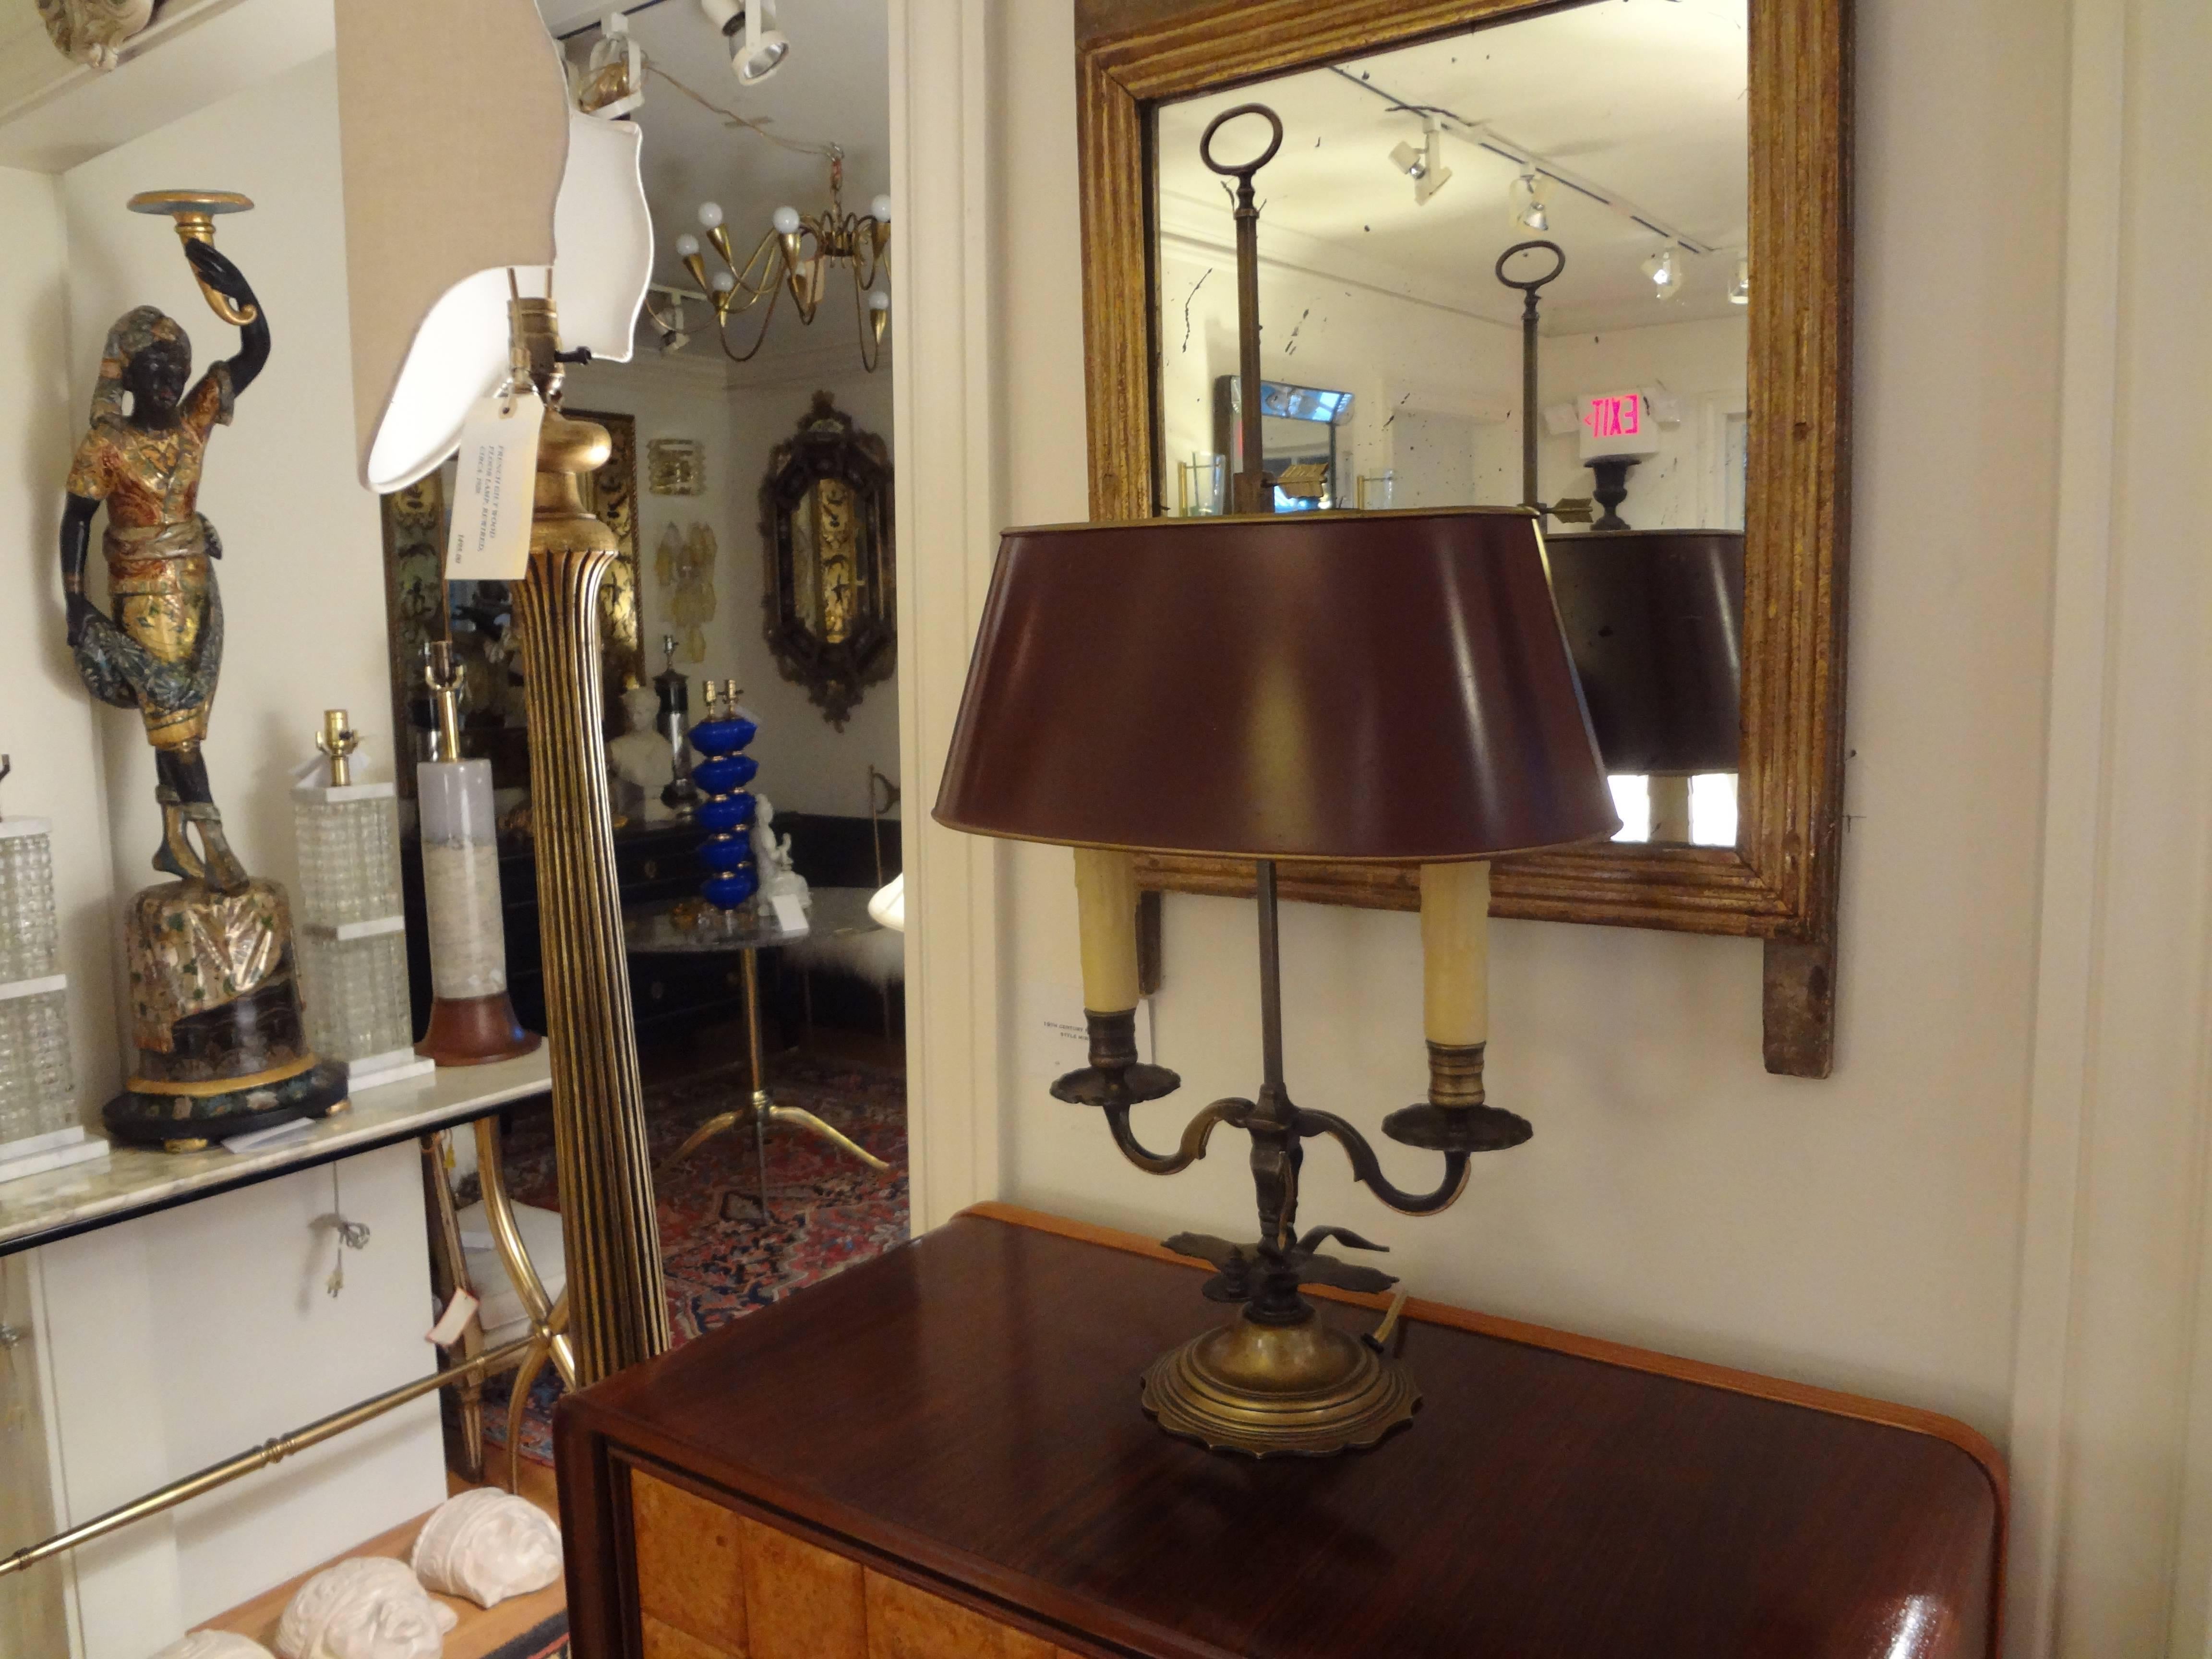 Lovely antique French neoclassical style bronze two-light bouillotte lamp or desk lamp with burgundy tole shade. This lovely French desk lamp has been wired for the U.S. market with candle sleeves.